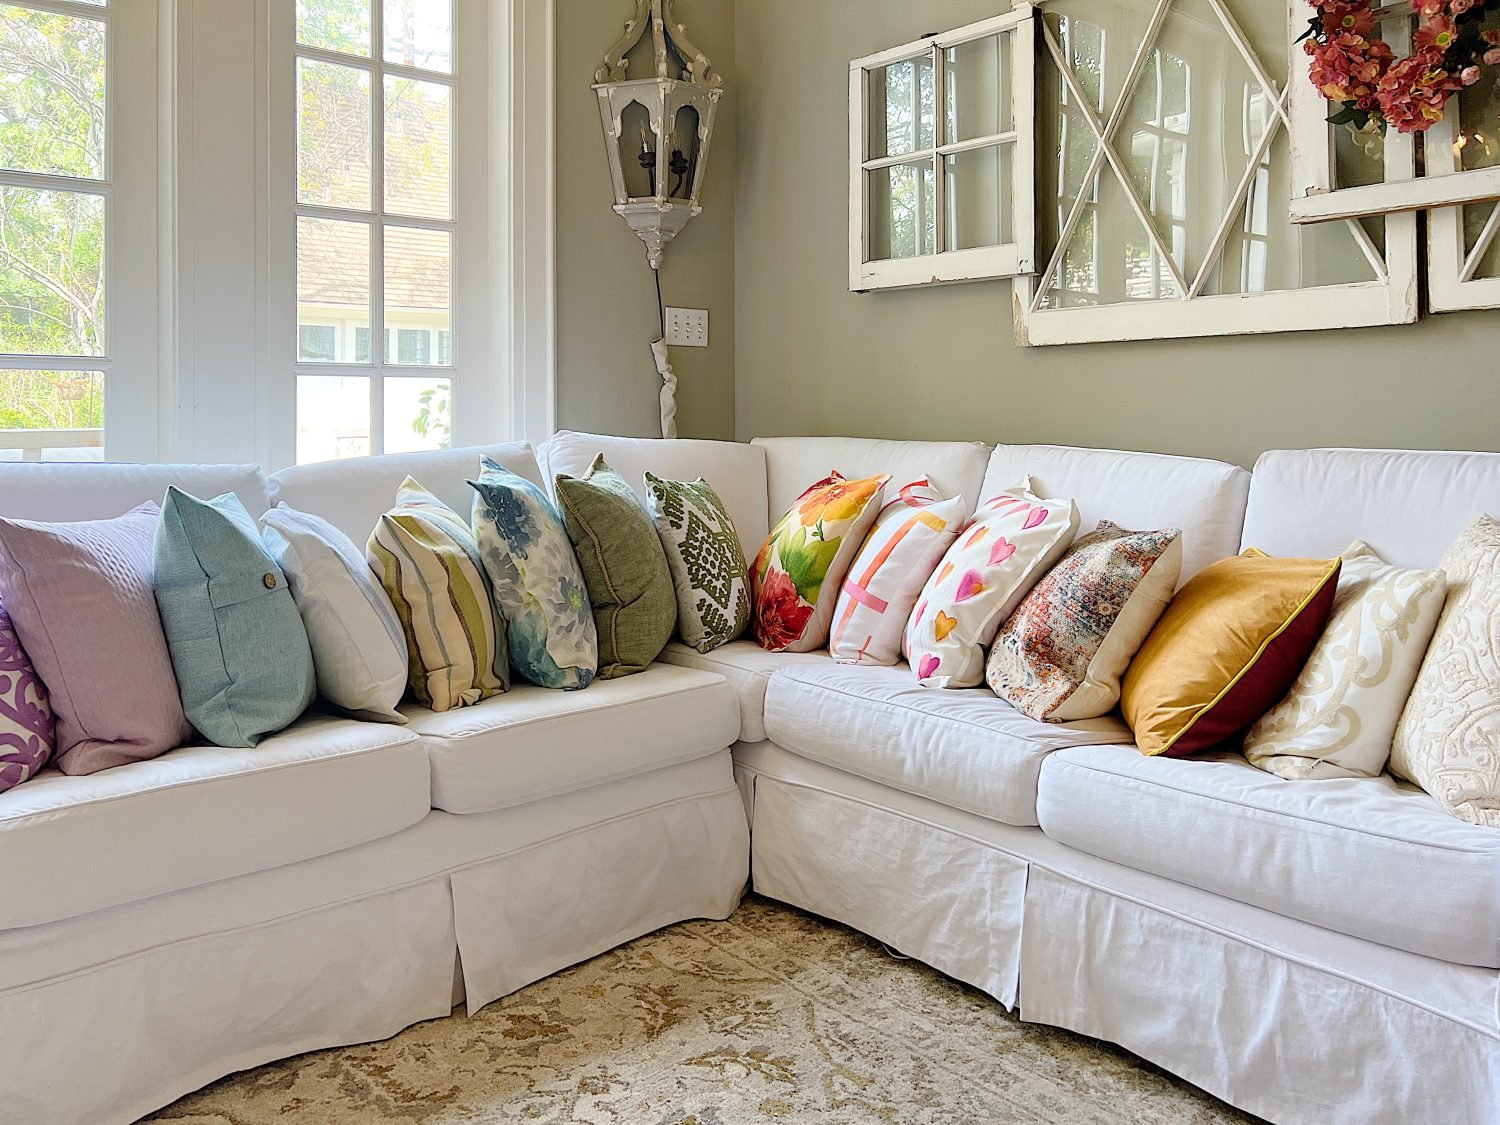 https://my100yearoldhome.com/wp-content/uploads/2023/04/Colorful-Throw-Pillows-for-Spring-Decorating-2.jpeg